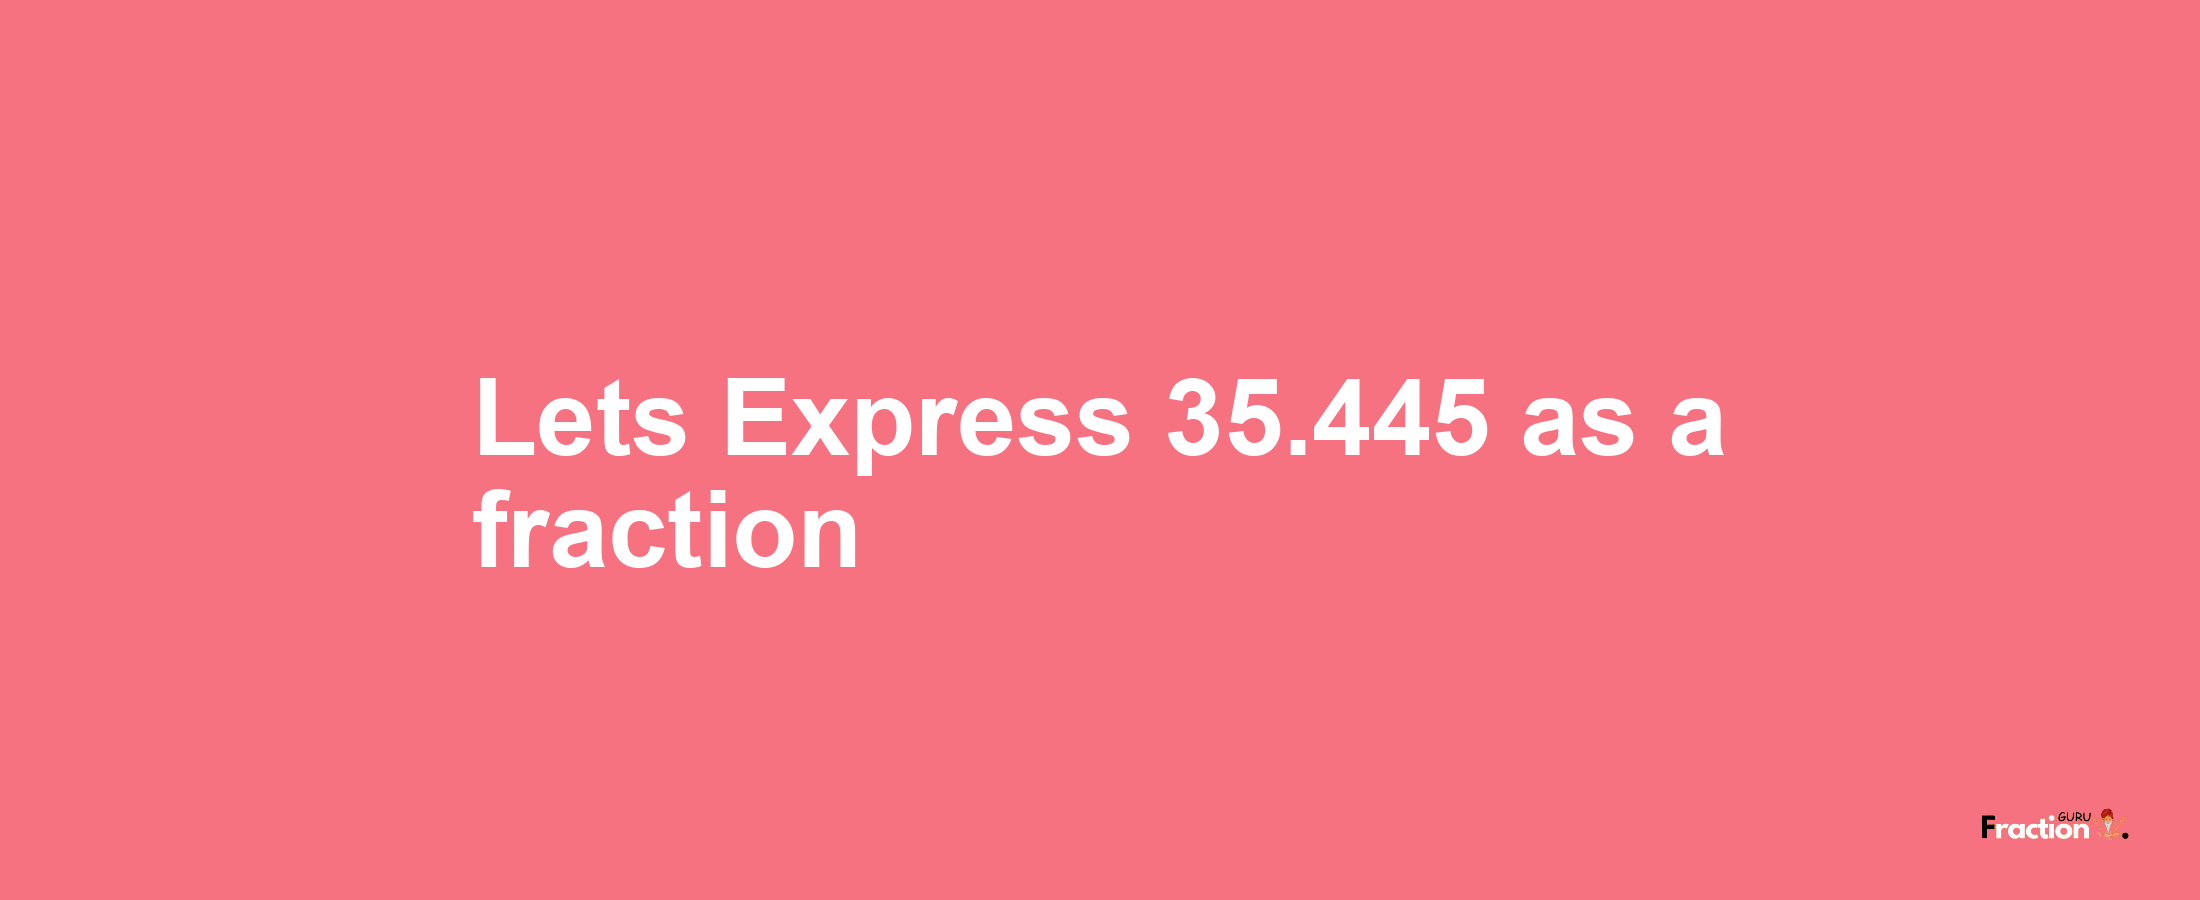 Lets Express 35.445 as afraction